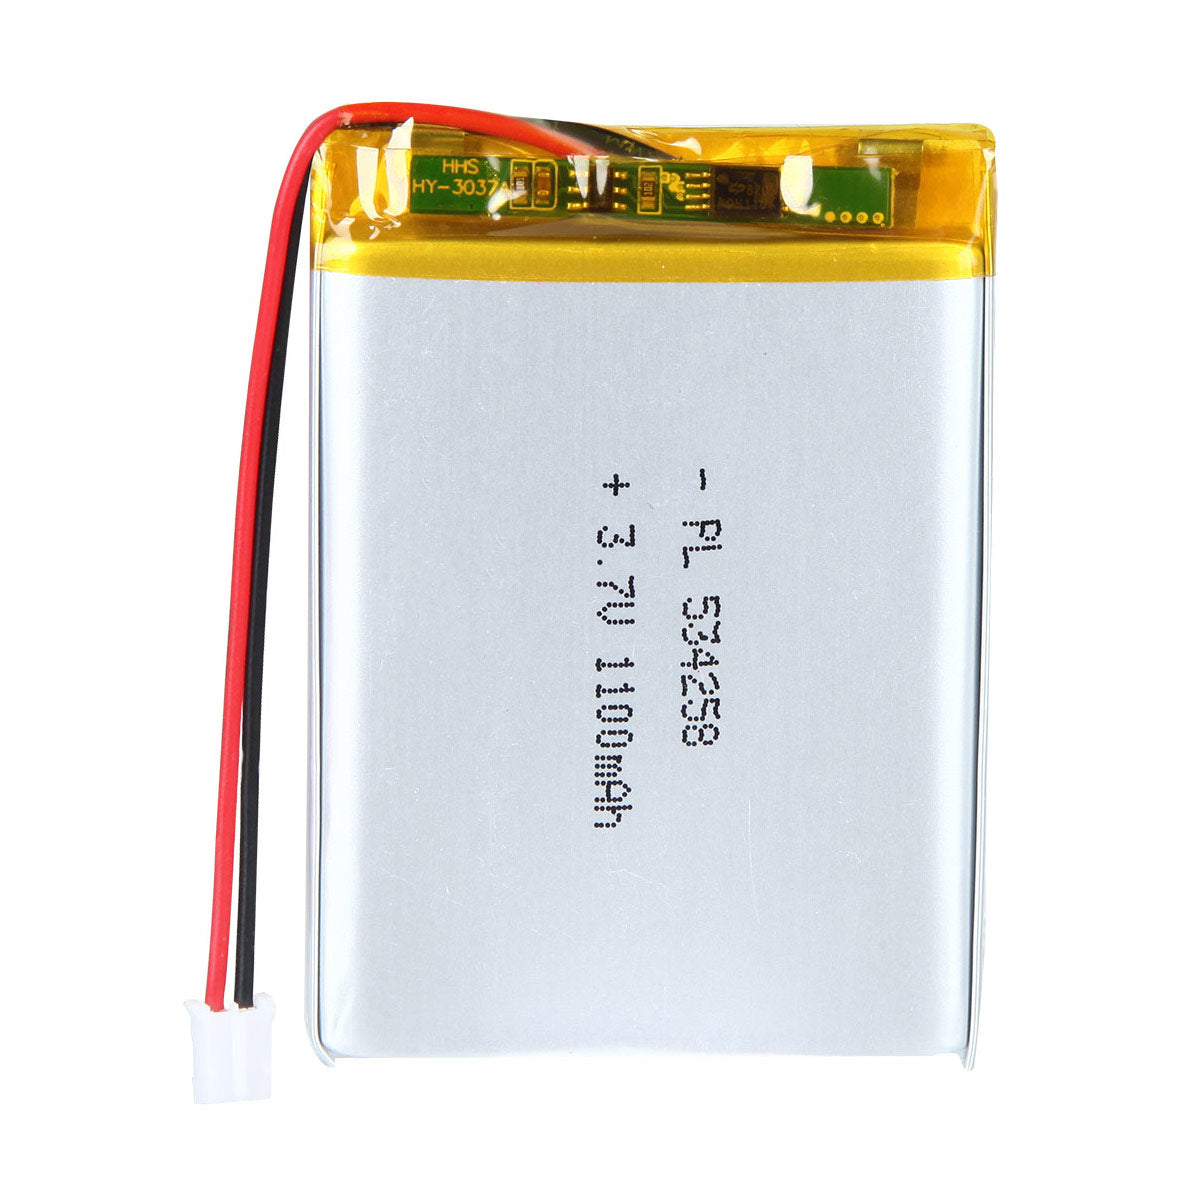 3.7V 1100mAh 534258 Rechargeable Lithium Polymer Battery